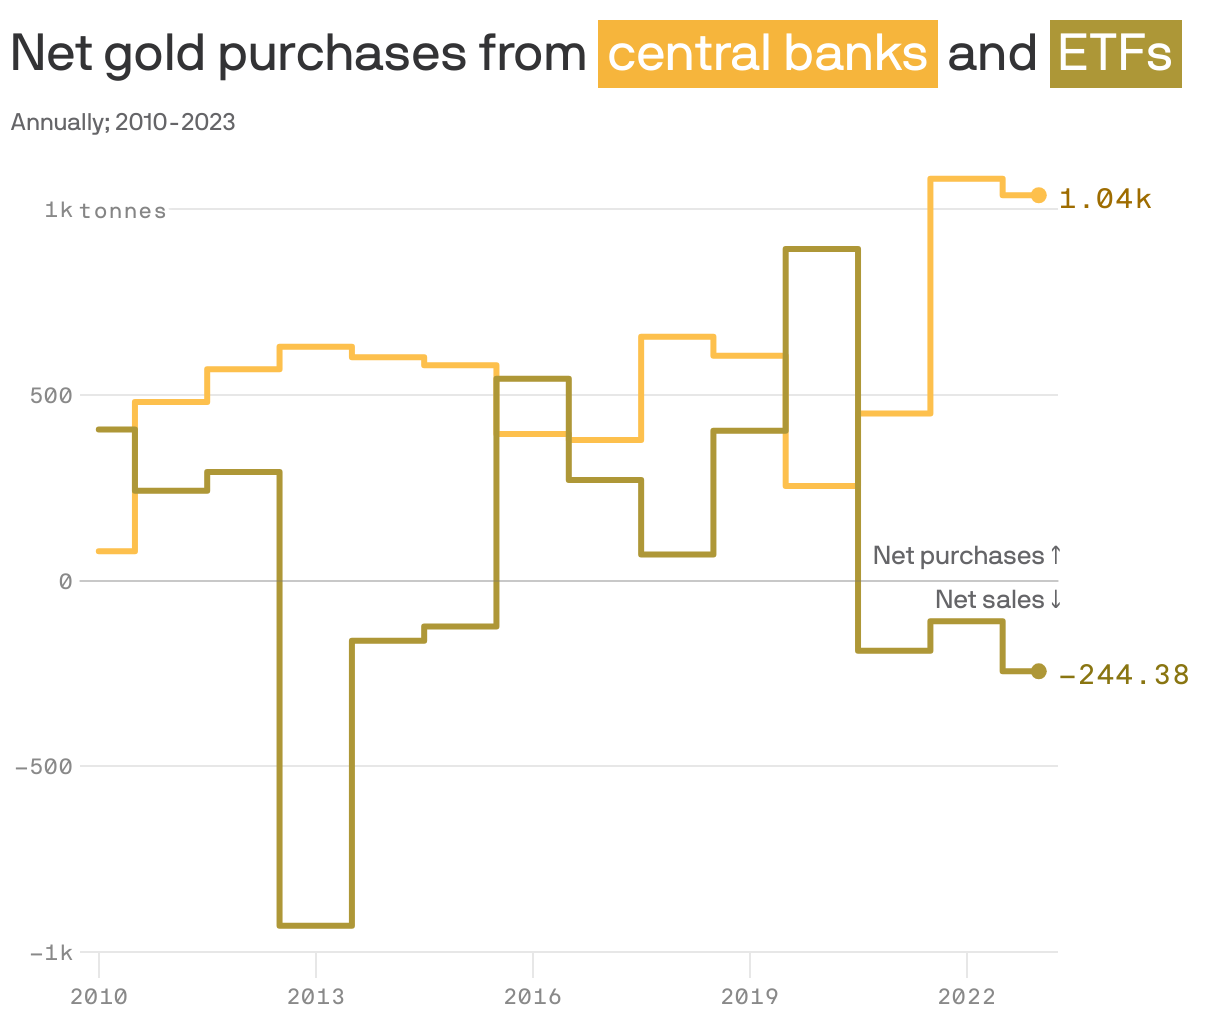 Net gold purchases from <span style="color: white; background-color:#F6B53C; padding: 0px 4px; display: inline-block; margin: 5px 0px 0px; white-space: nowrap; font-weight: 500;">central banks</span>
and 
<span style="color: white; background-color:#ad9737; padding: 0px 4px; display: inline-block; margin: 5px 0px 0px; white-space: nowrap; font-weight: 500;">ETFs</span>